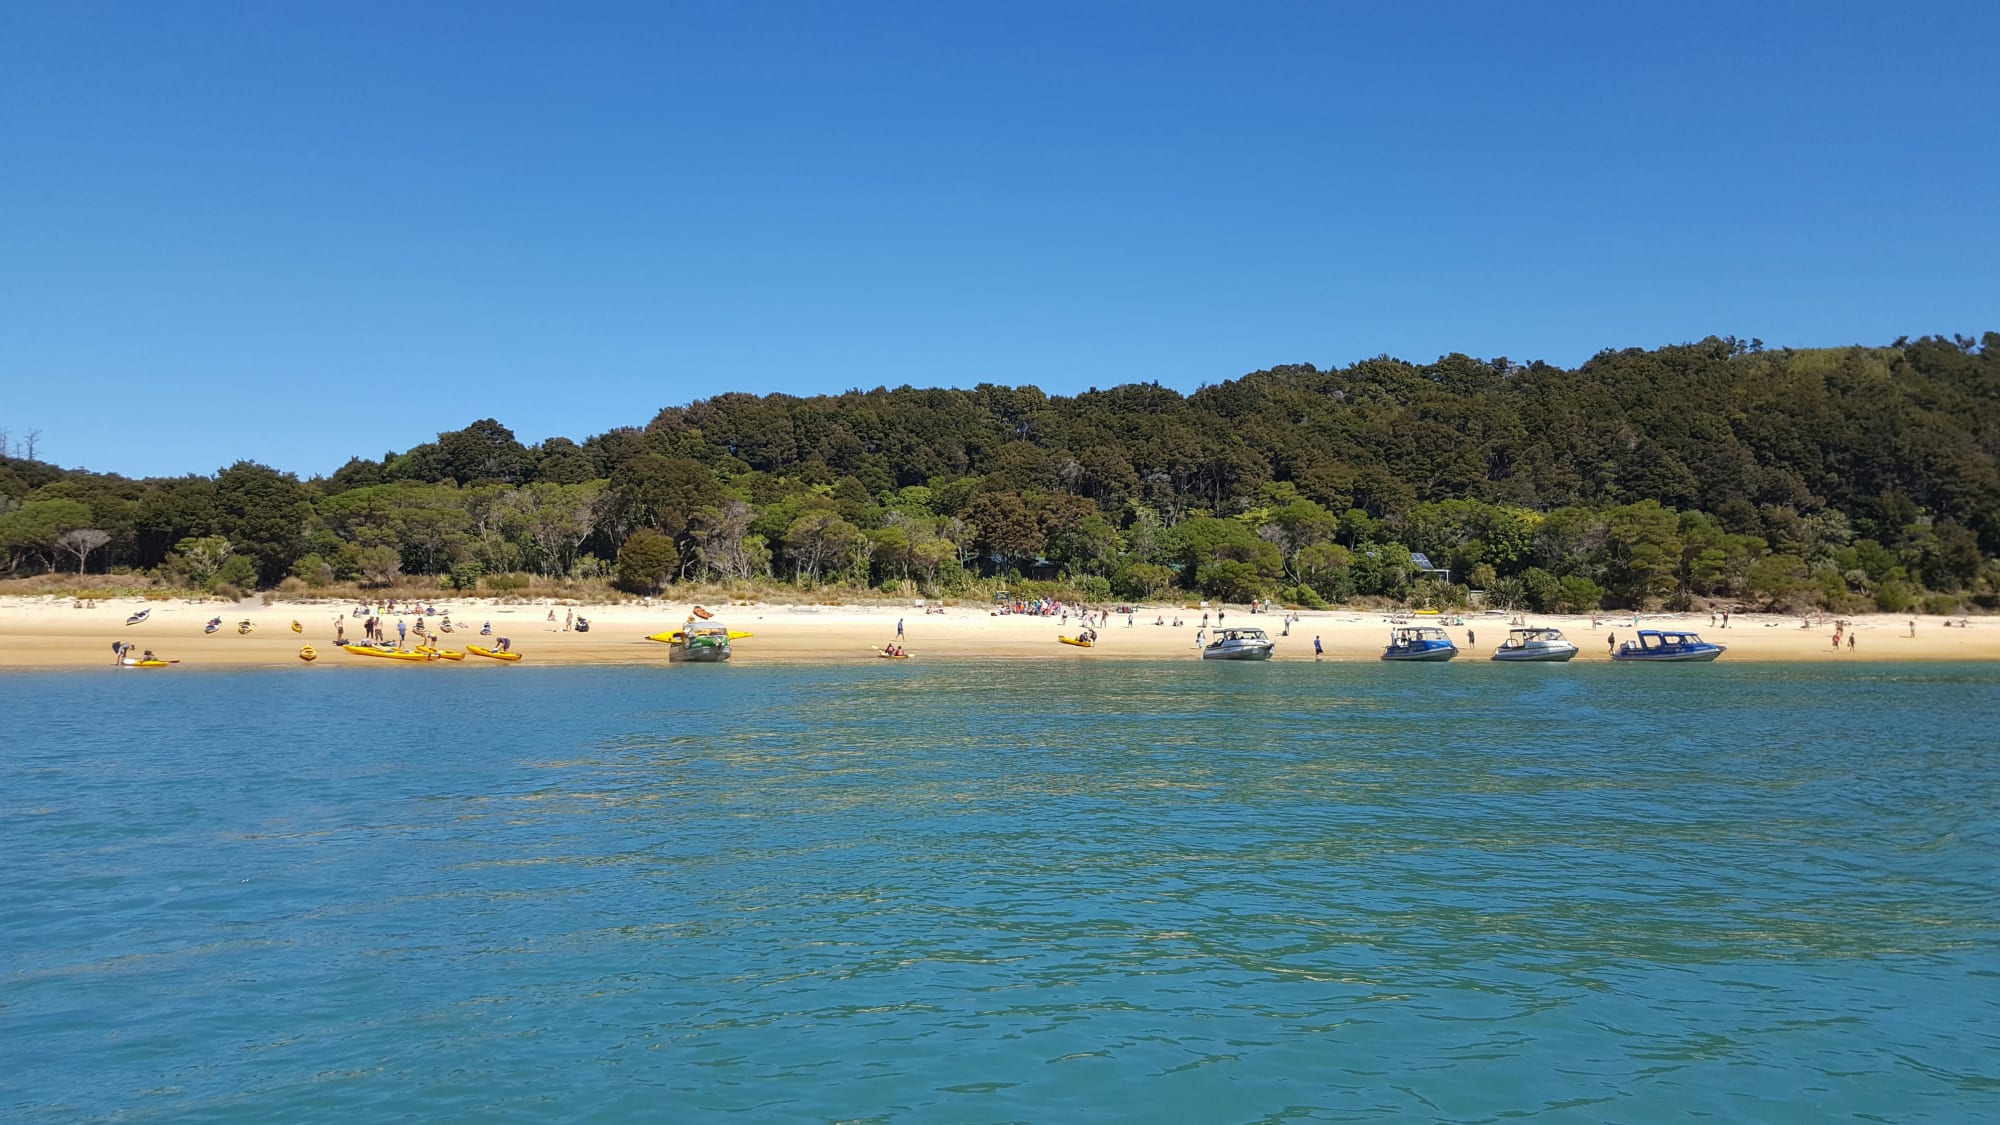 Boats and water taxis line the beach at Anchorage, Abel Tasman National Park in March 2017 - well after the peak tourist season